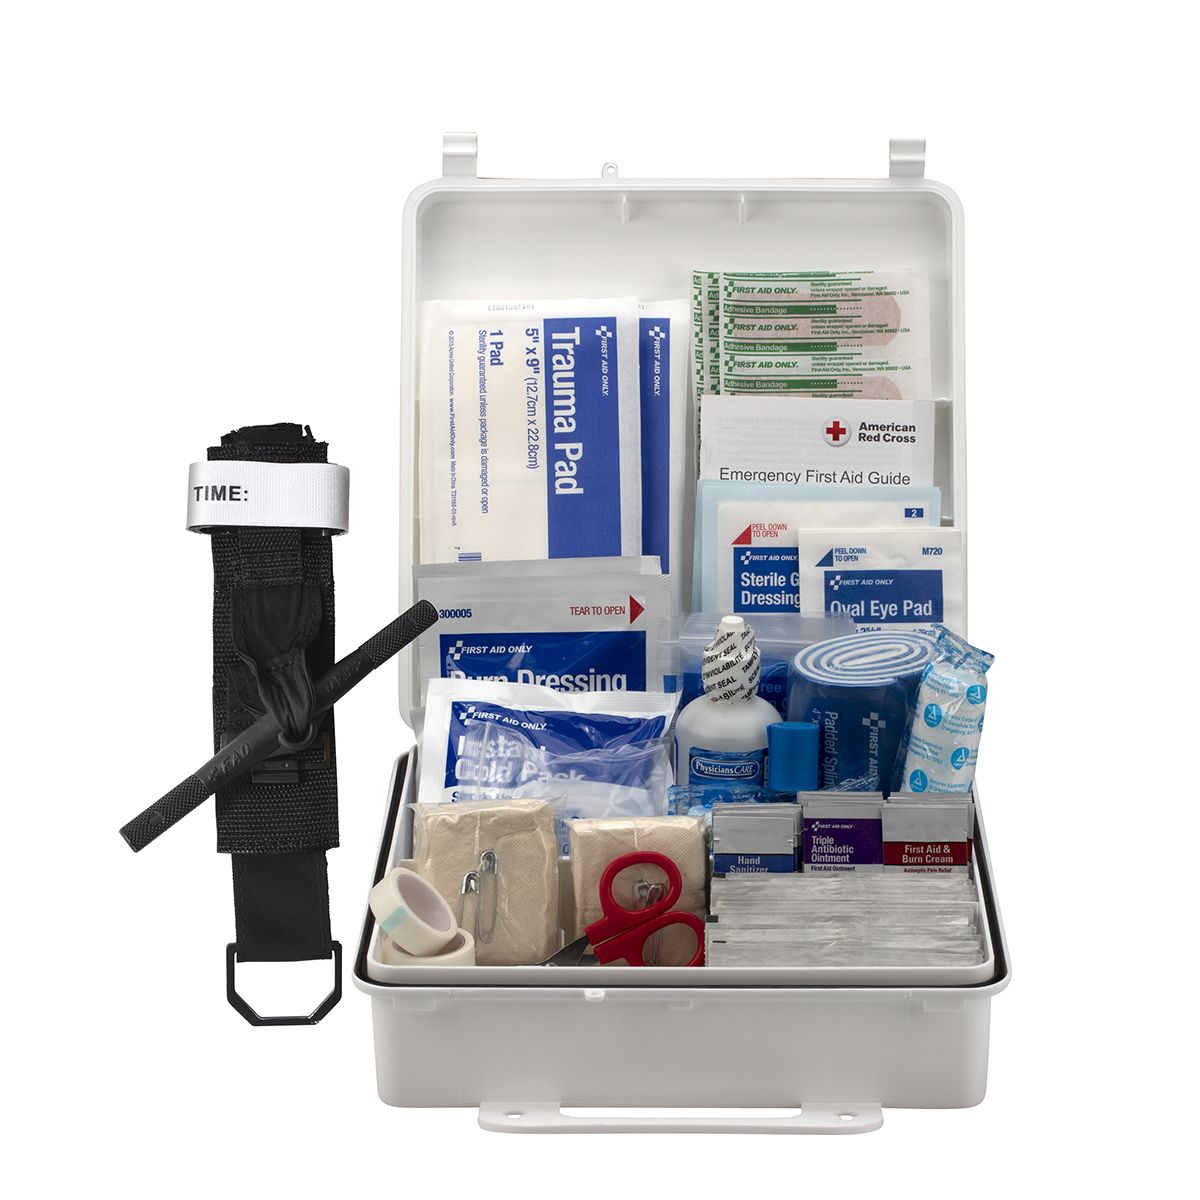 First Aid Only ANSI B 50 Person Plastic ANSI 2021 Compliant First Aid Kit from Columbia Safety